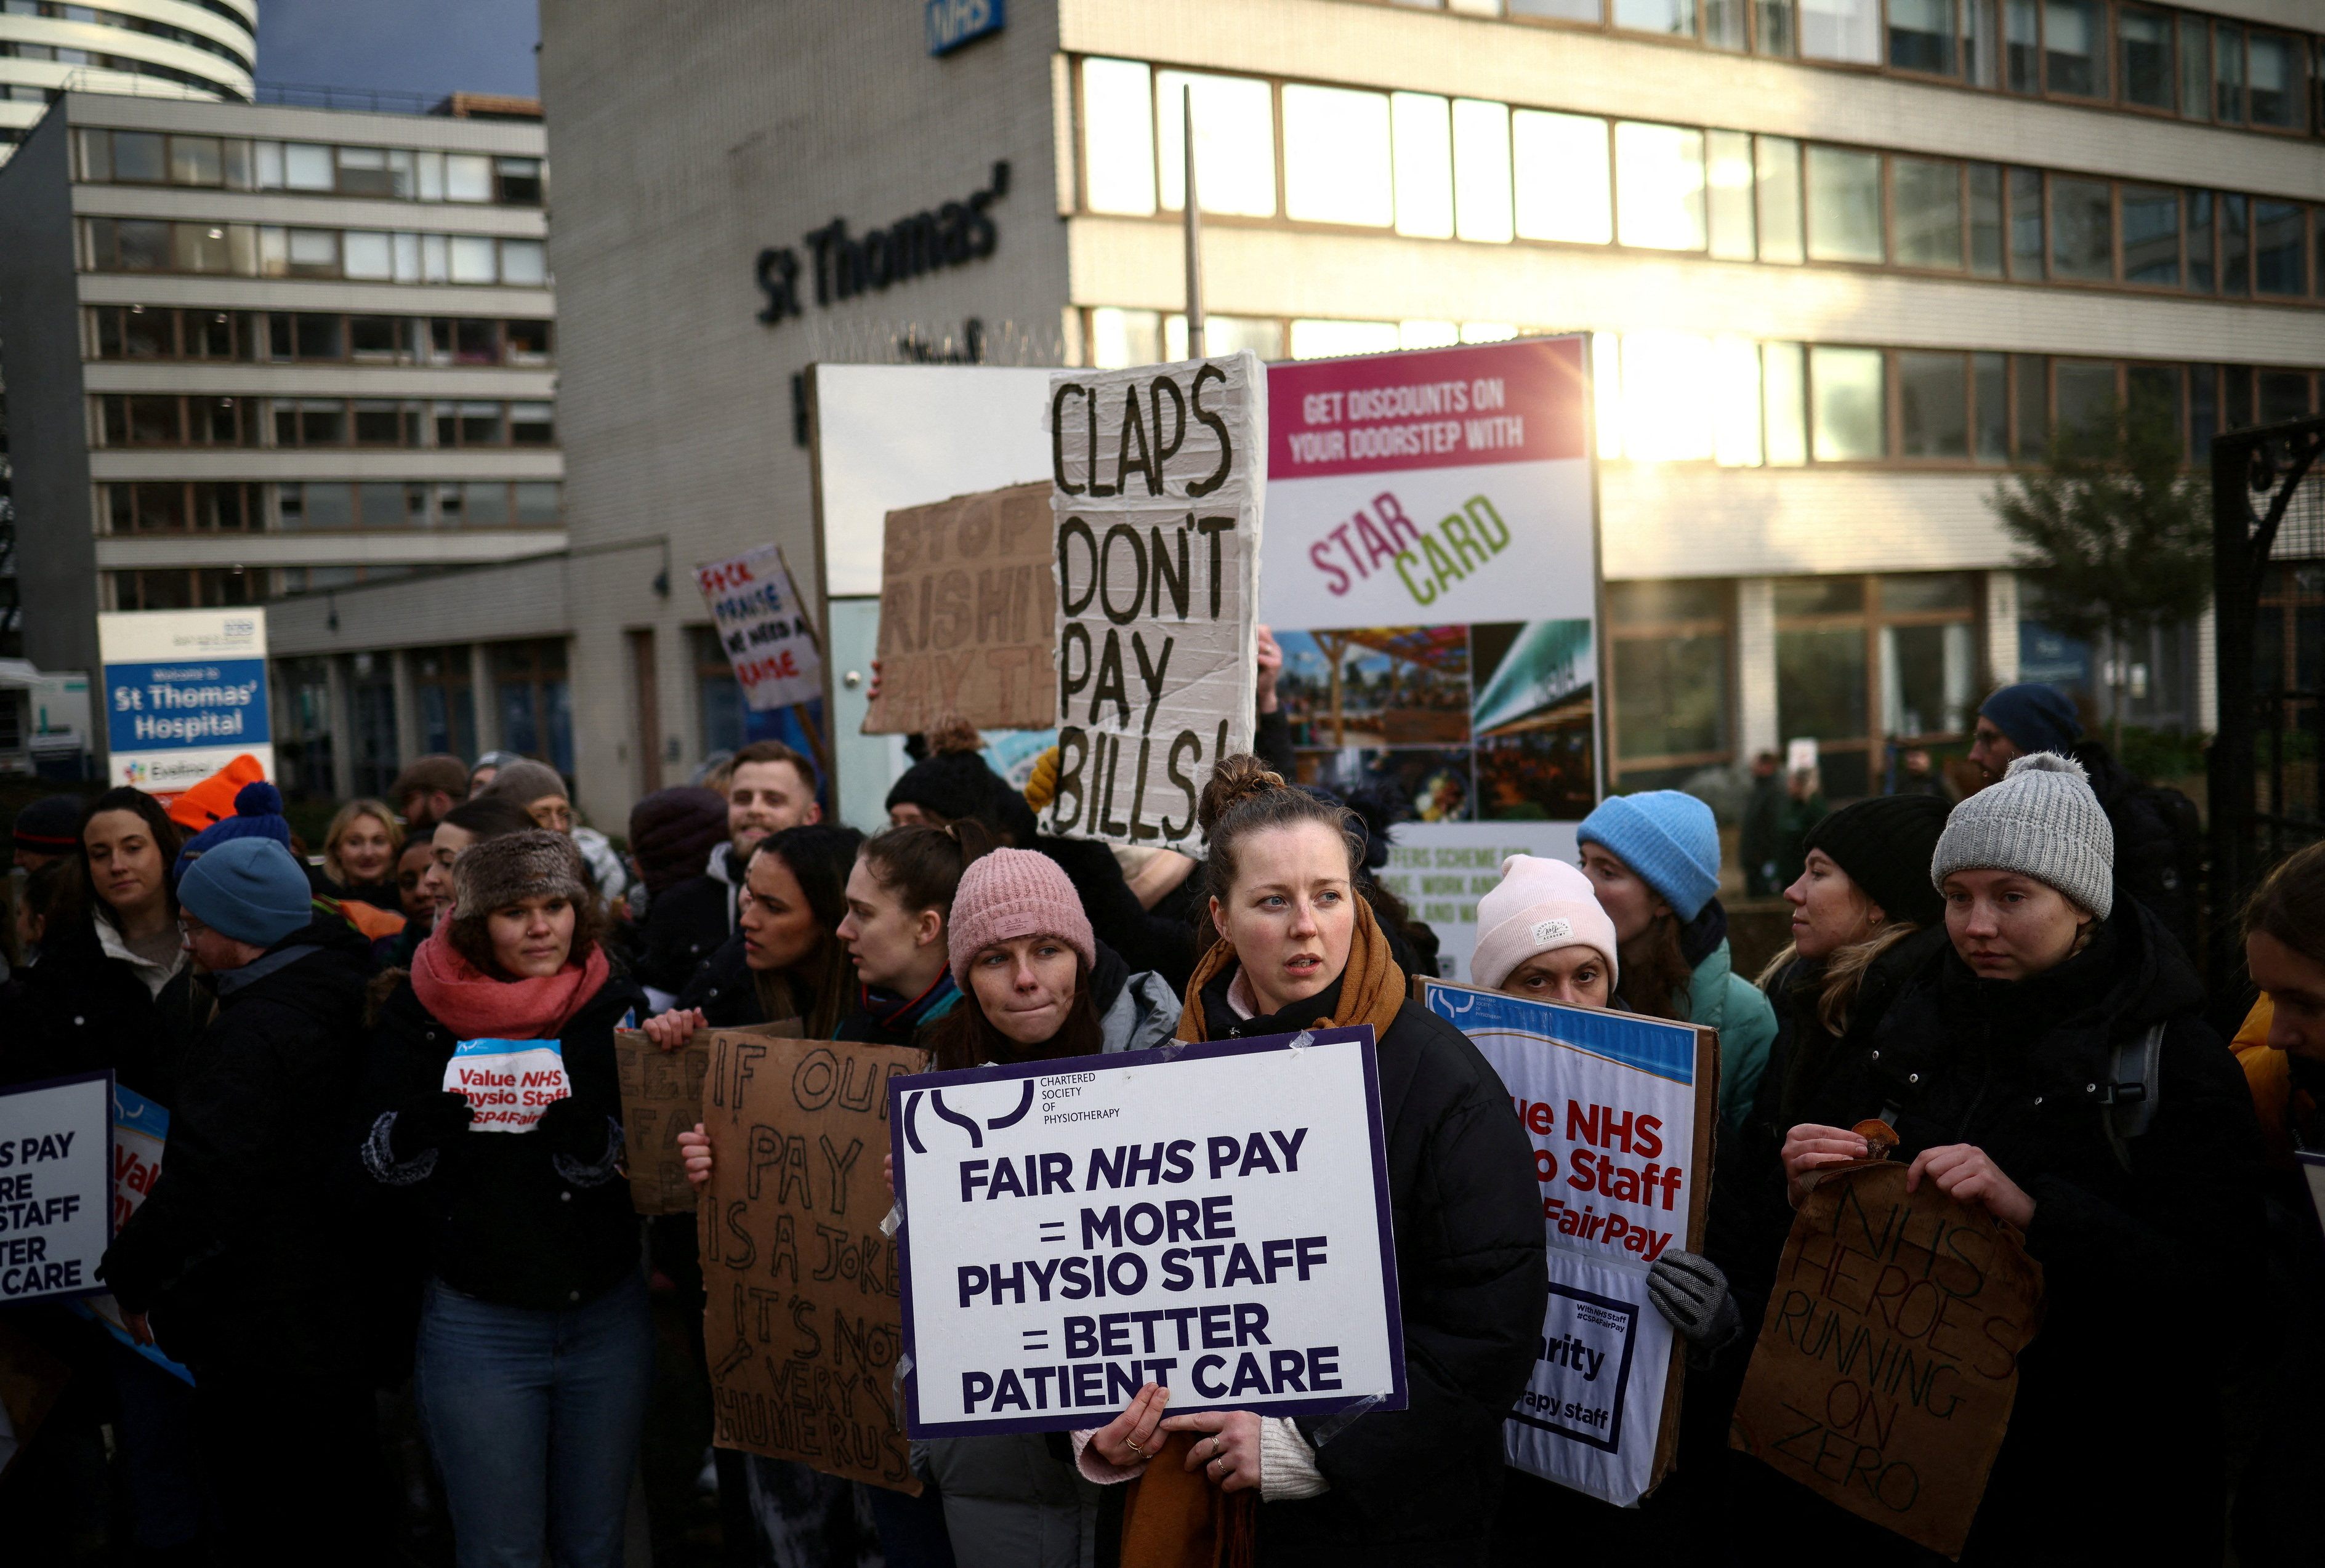 NHS physiotherapists striking outside St Thomas’ Hospital in London on Thursday. Photo: Reuters